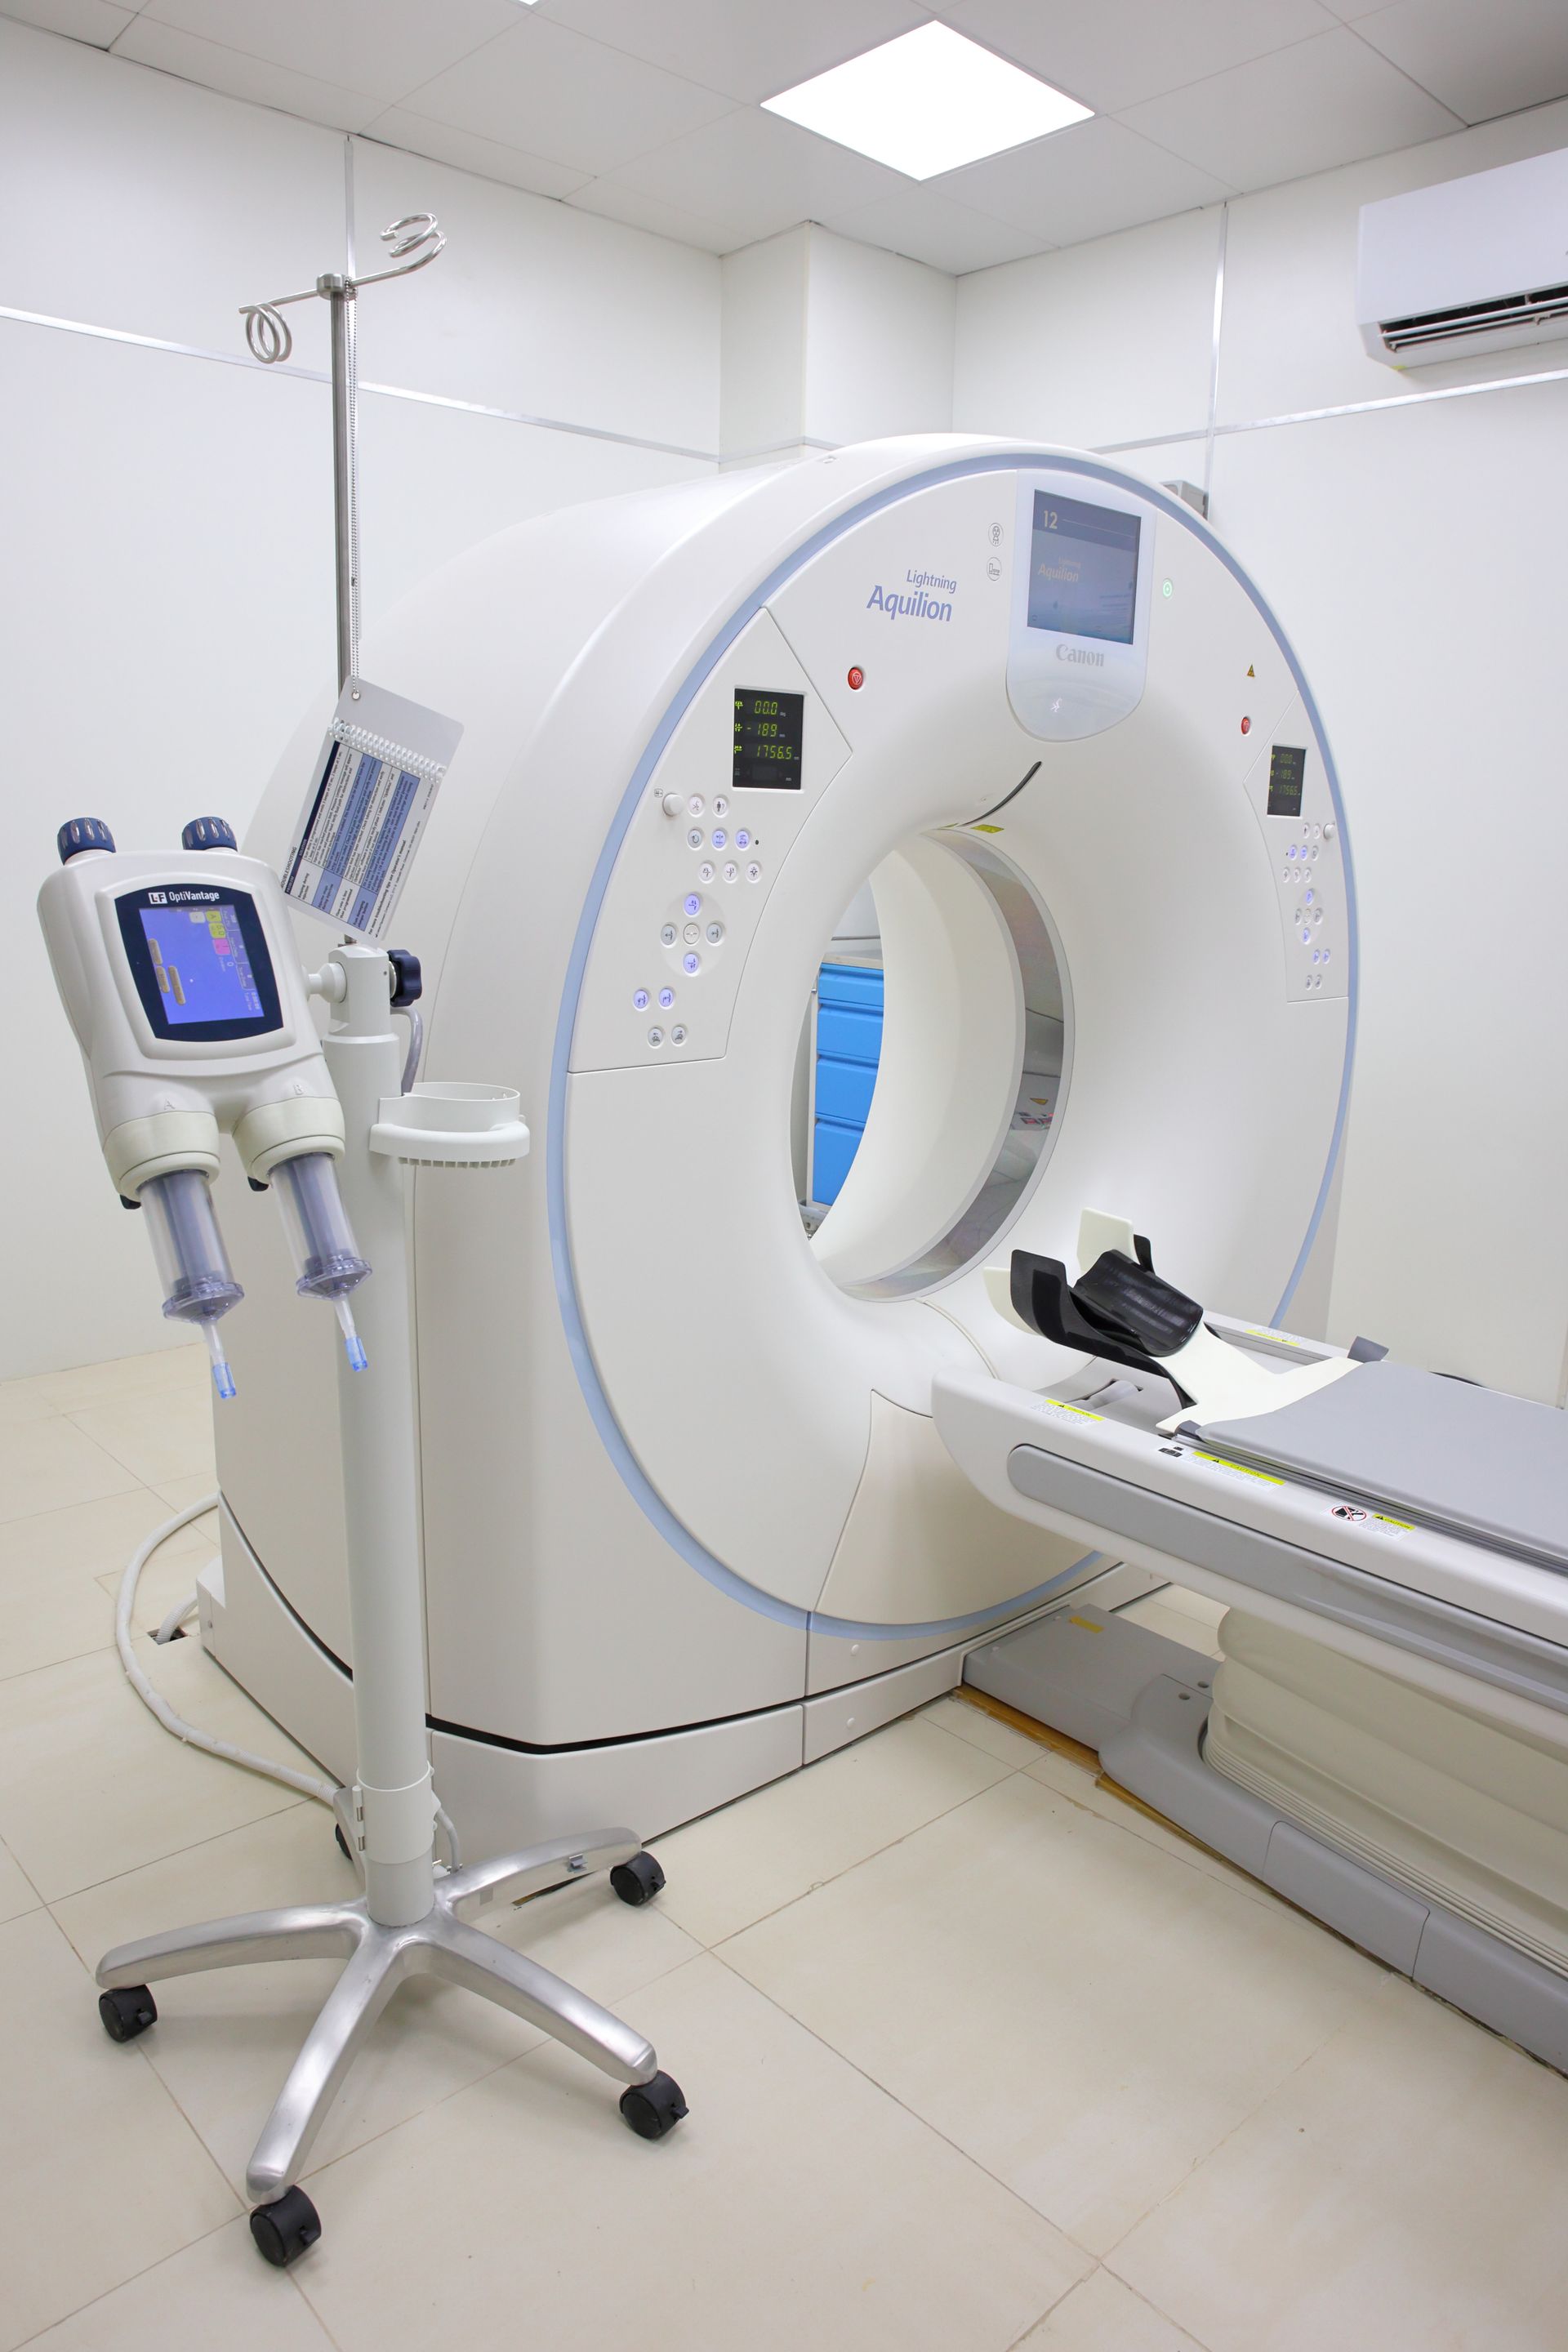 Non-encapsulated MRI equipment relying on high-grade helium to keep it running smoothly.